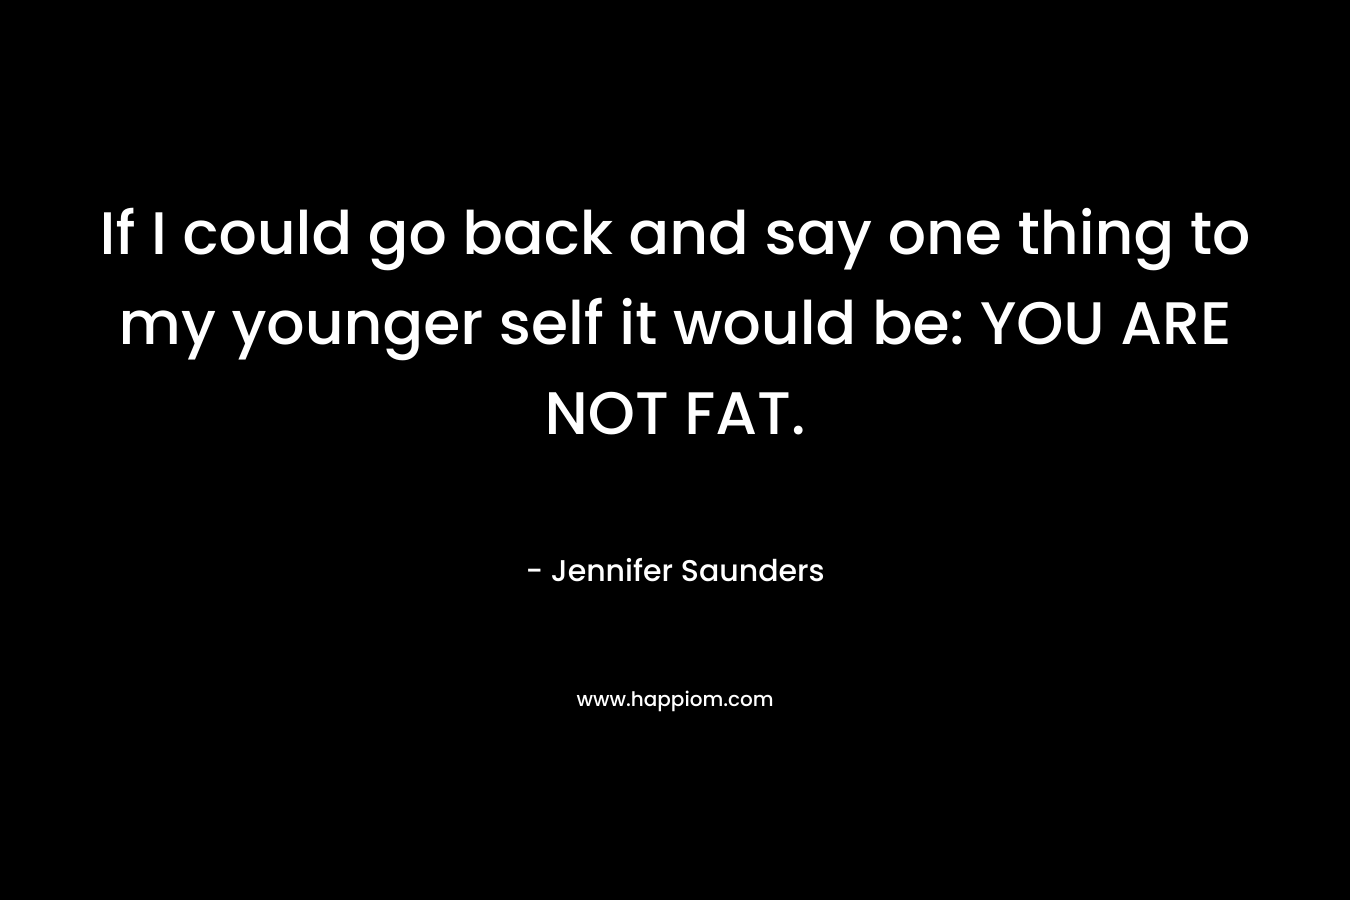 If I could go back and say one thing to my younger self it would be: YOU ARE NOT FAT. – Jennifer Saunders